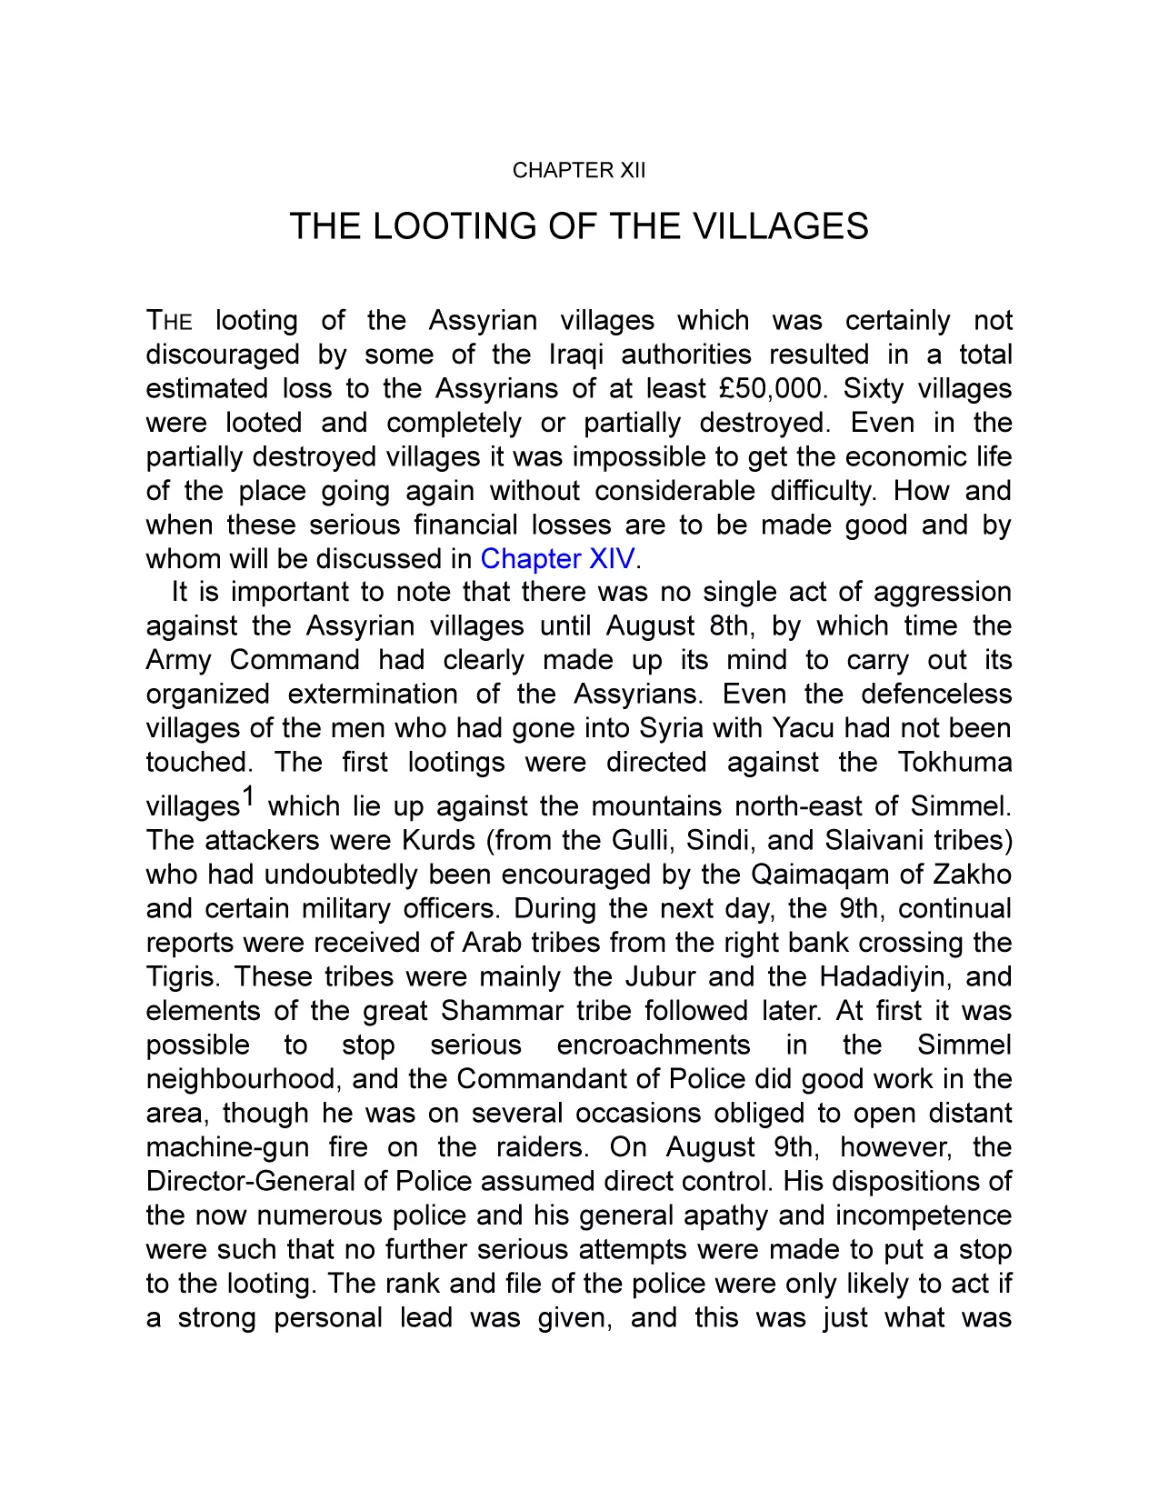 XII The Looting of the Villages